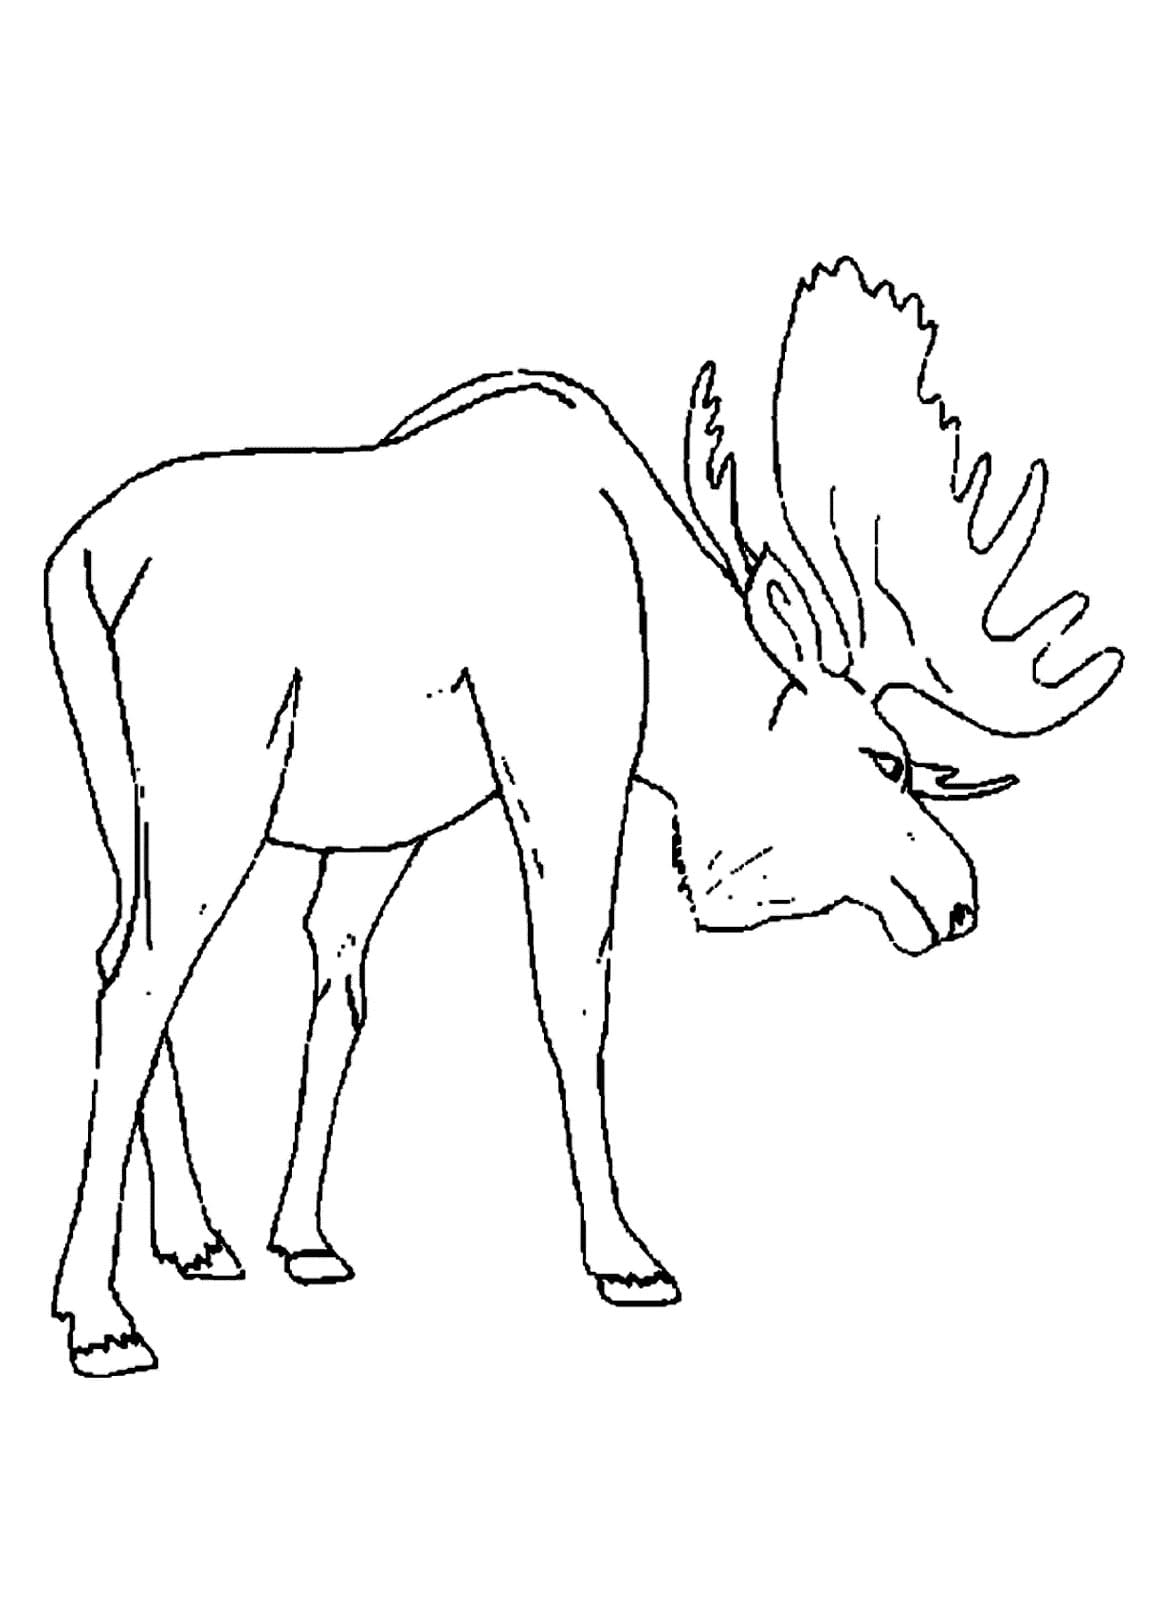 Moose Coloring Pages Image